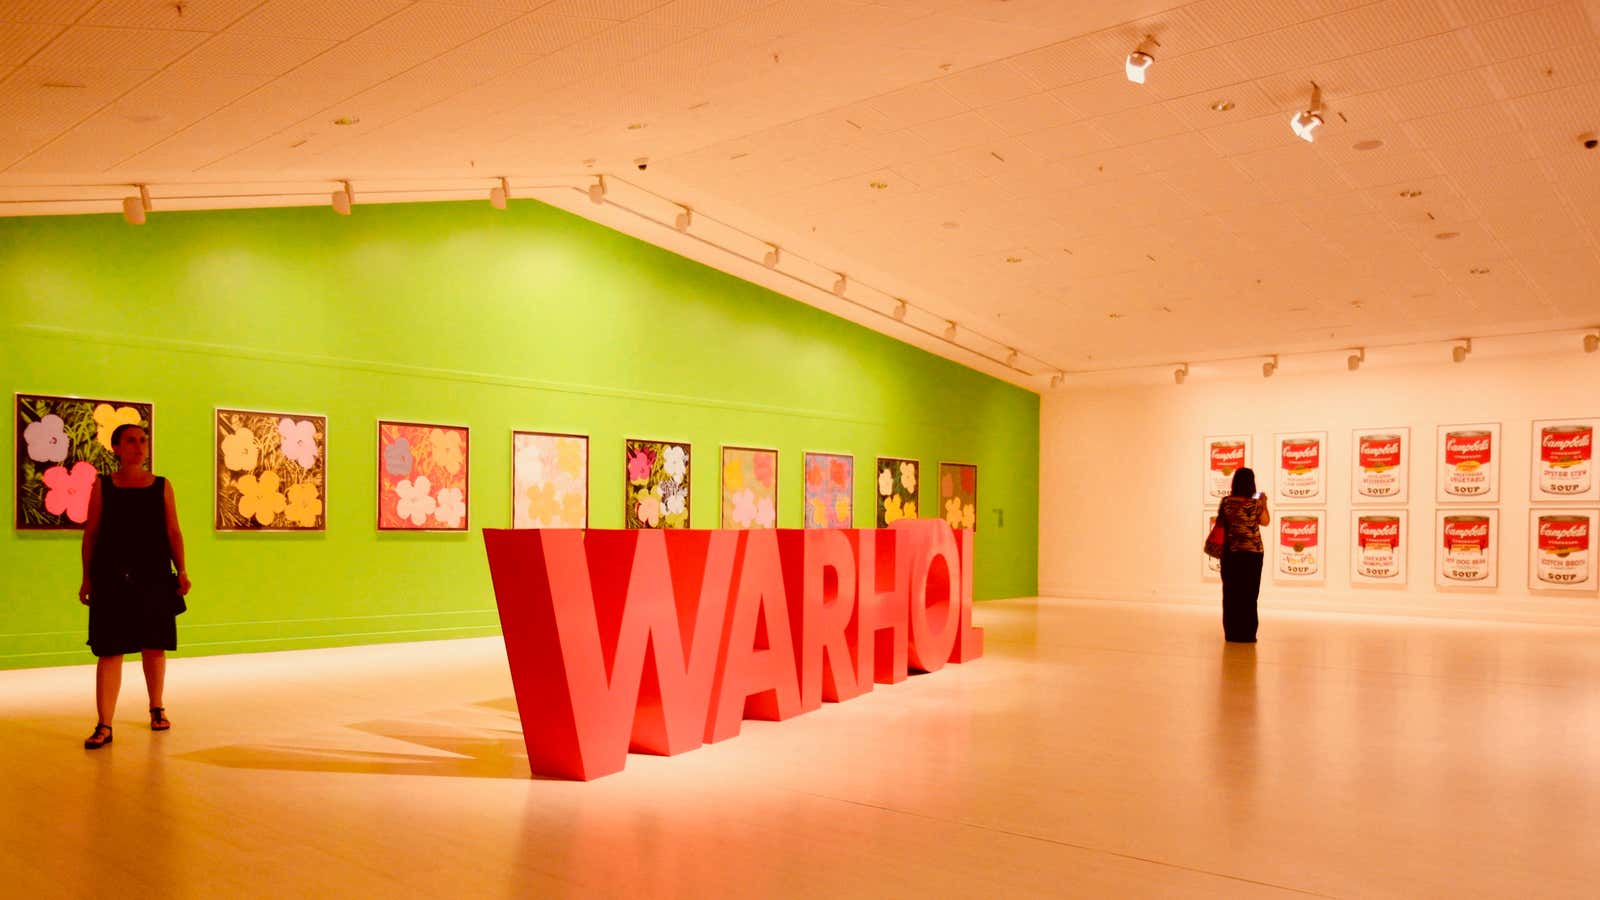 You can own Warhol shares but you’ll still need to visit an exhibit.